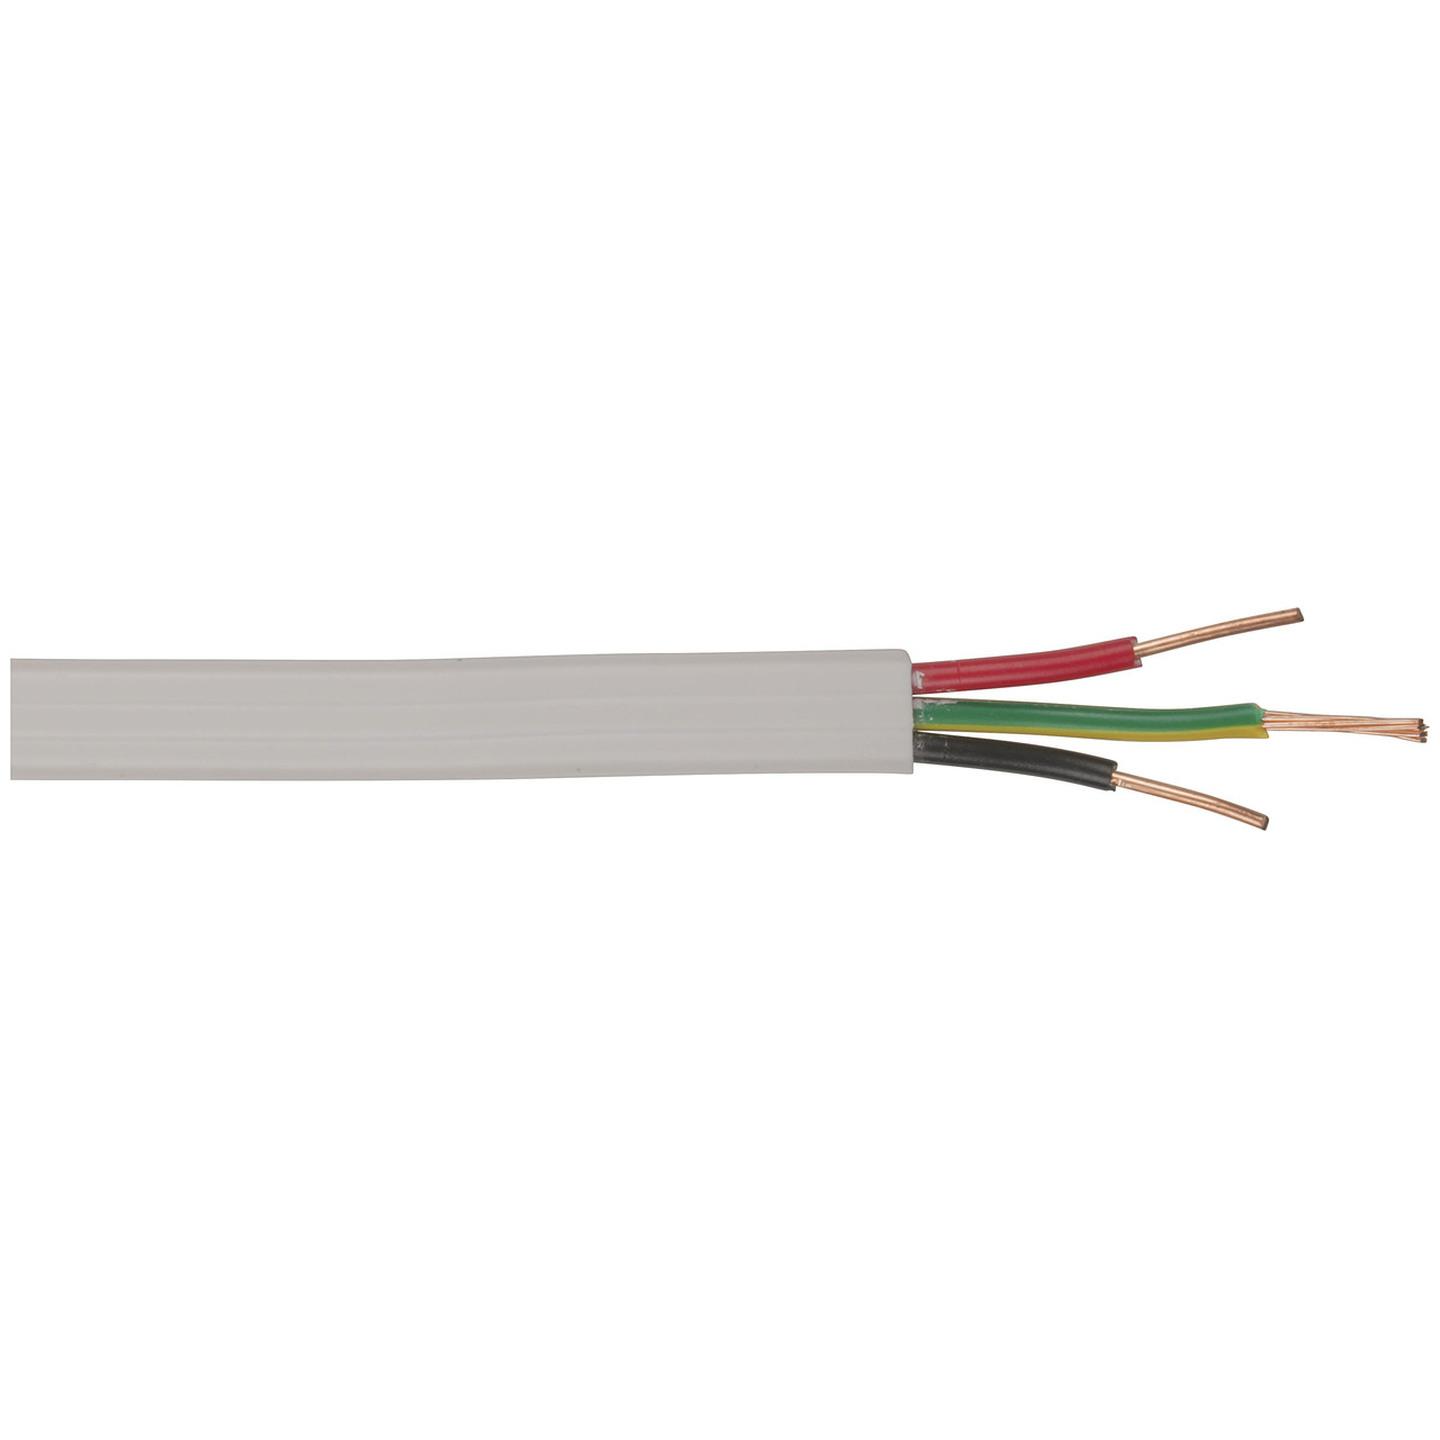 Mains 10A Twin and Earth Power Cable